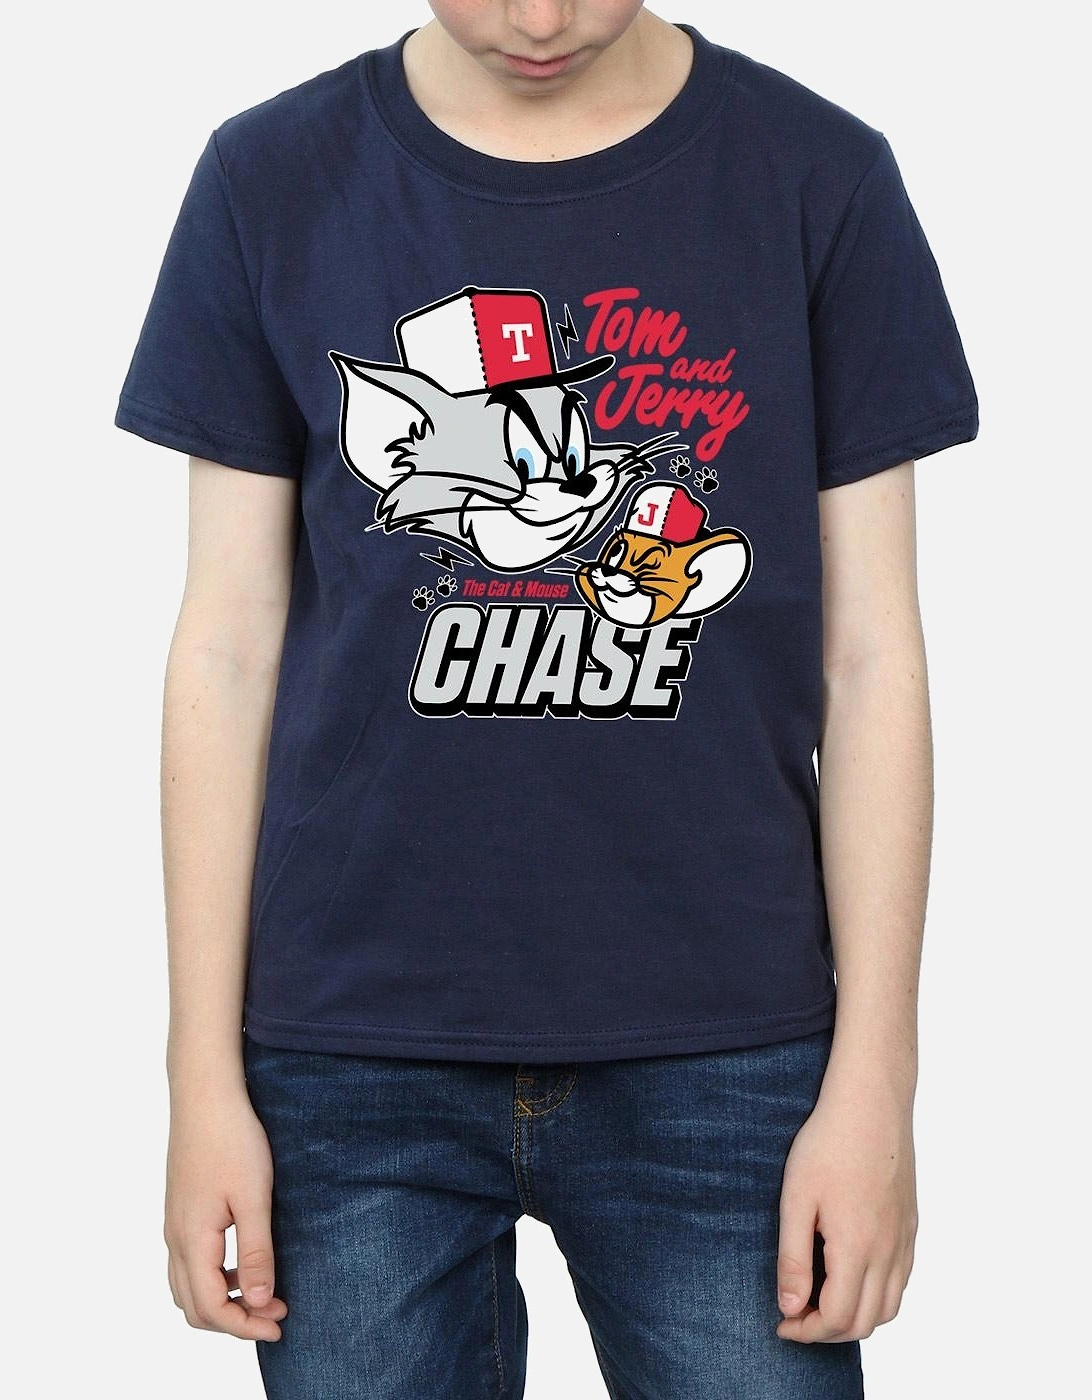 Tom And Jerry Boys Cat & Mouse Chase T-Shirt